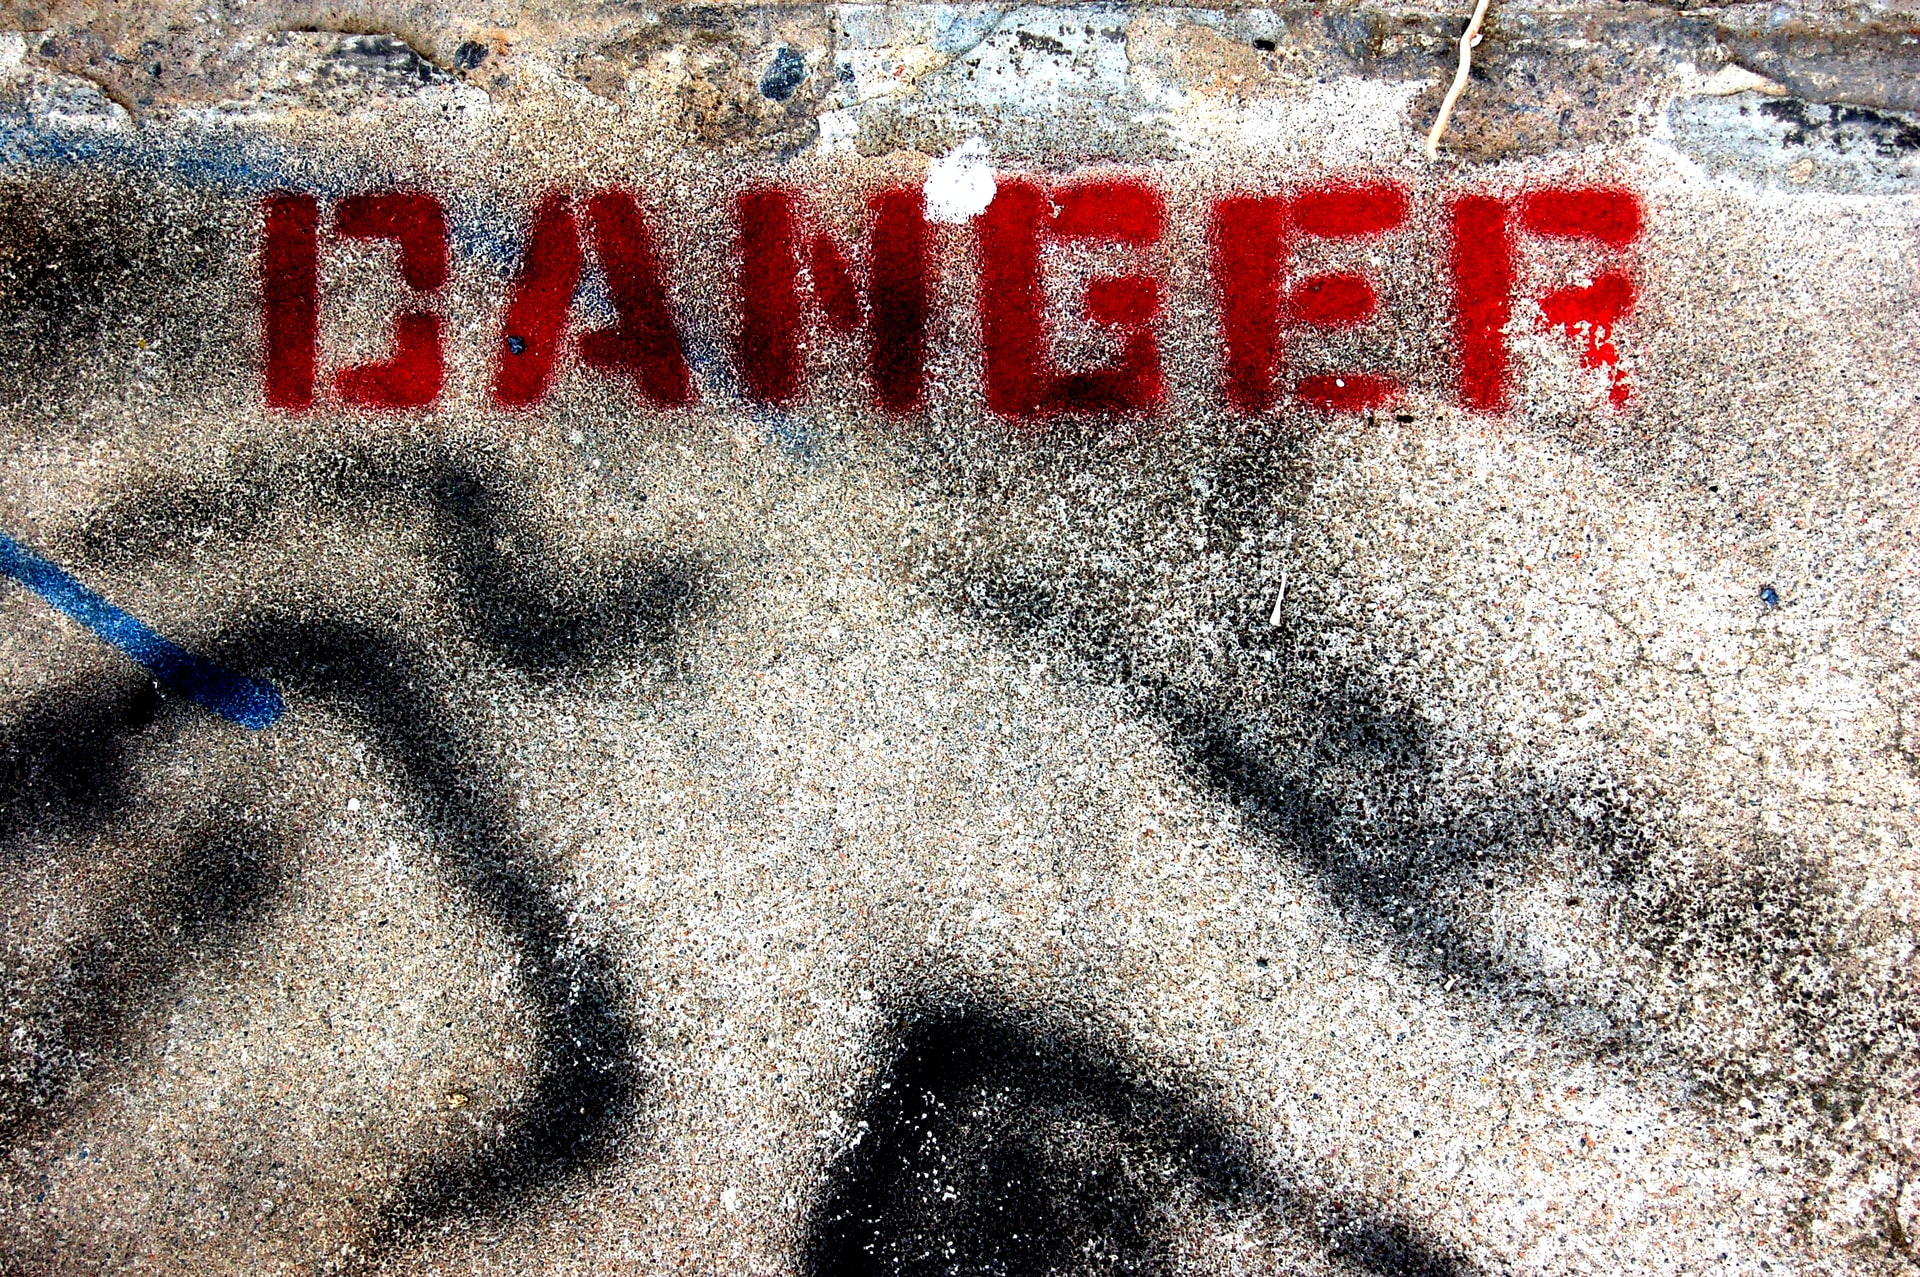 dangerous offense crime - word danger spray painted in red on concrete